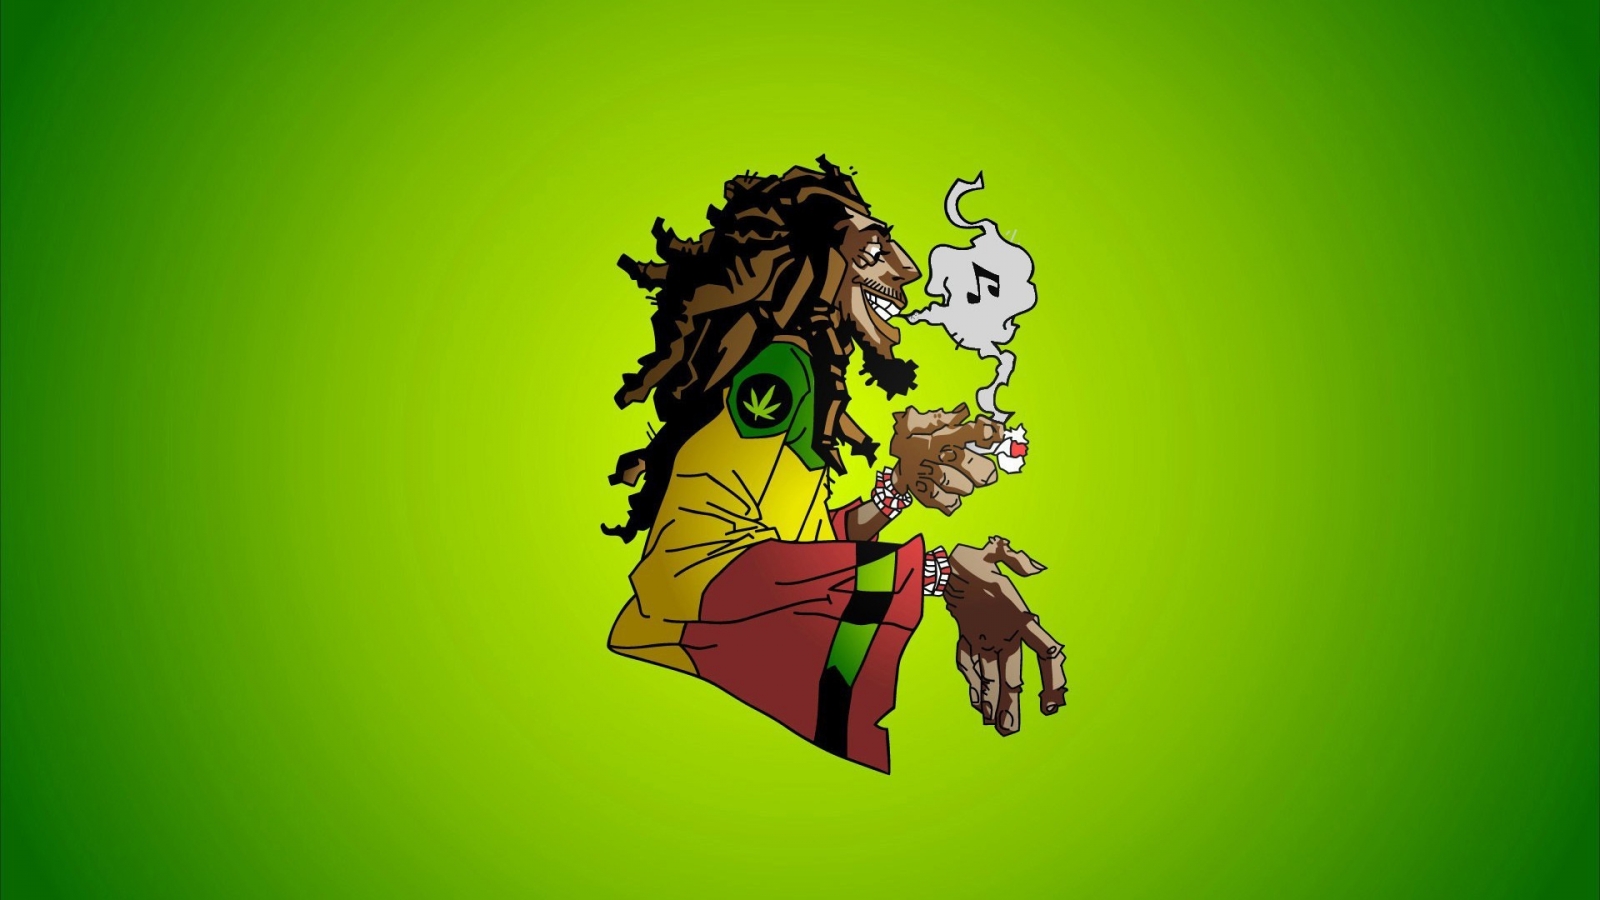 Bob Marley Caricature for 1600 x 900 HDTV resolution